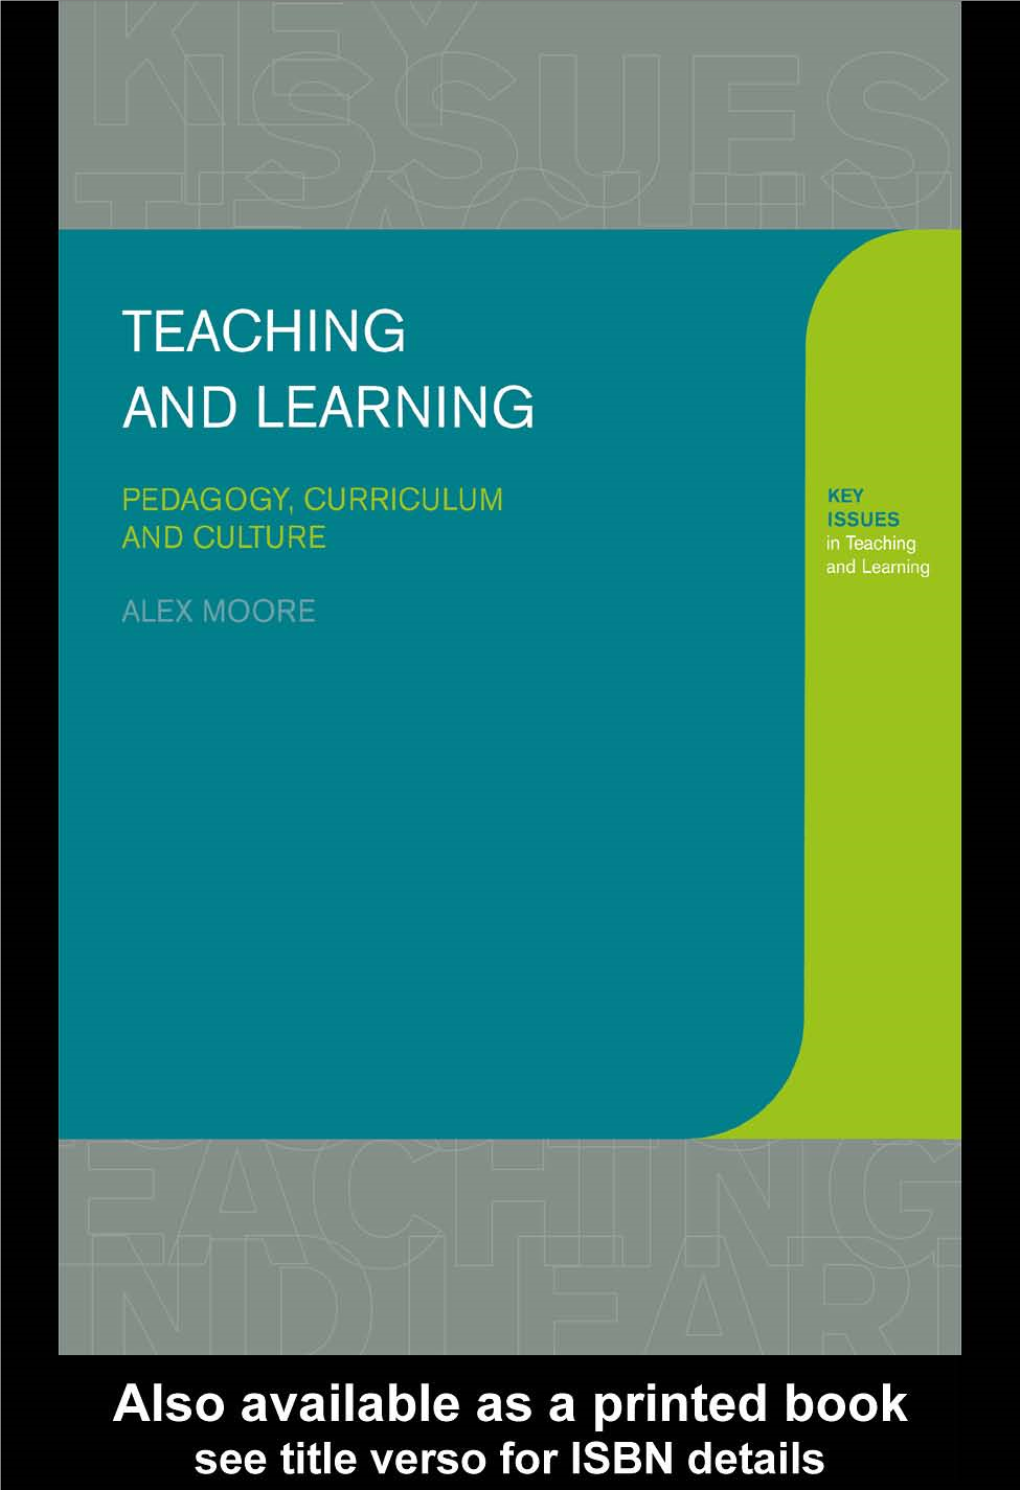 Teaching and Learning: Pedagogy, Curriculum and Culture